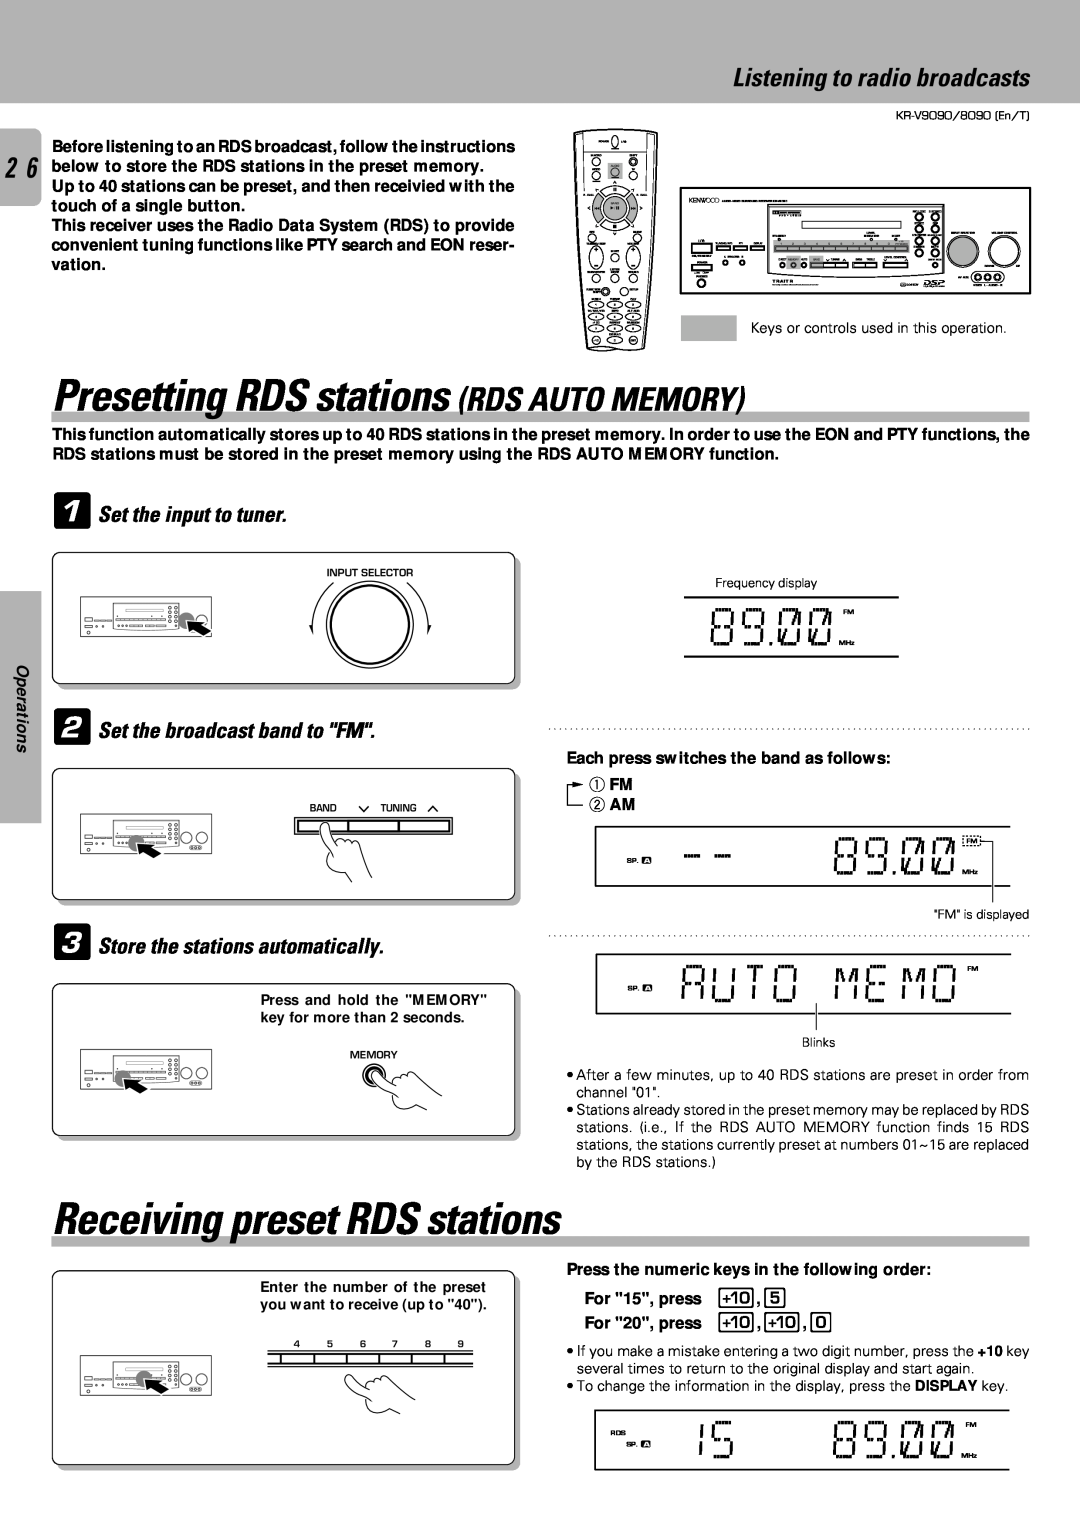 Kenwood KR-V9090 Auto Me Mo, Presetting RDS stations RDS AUTO MEMORY, Receiving preset RDS stations, 89. FM, 89.MHz 